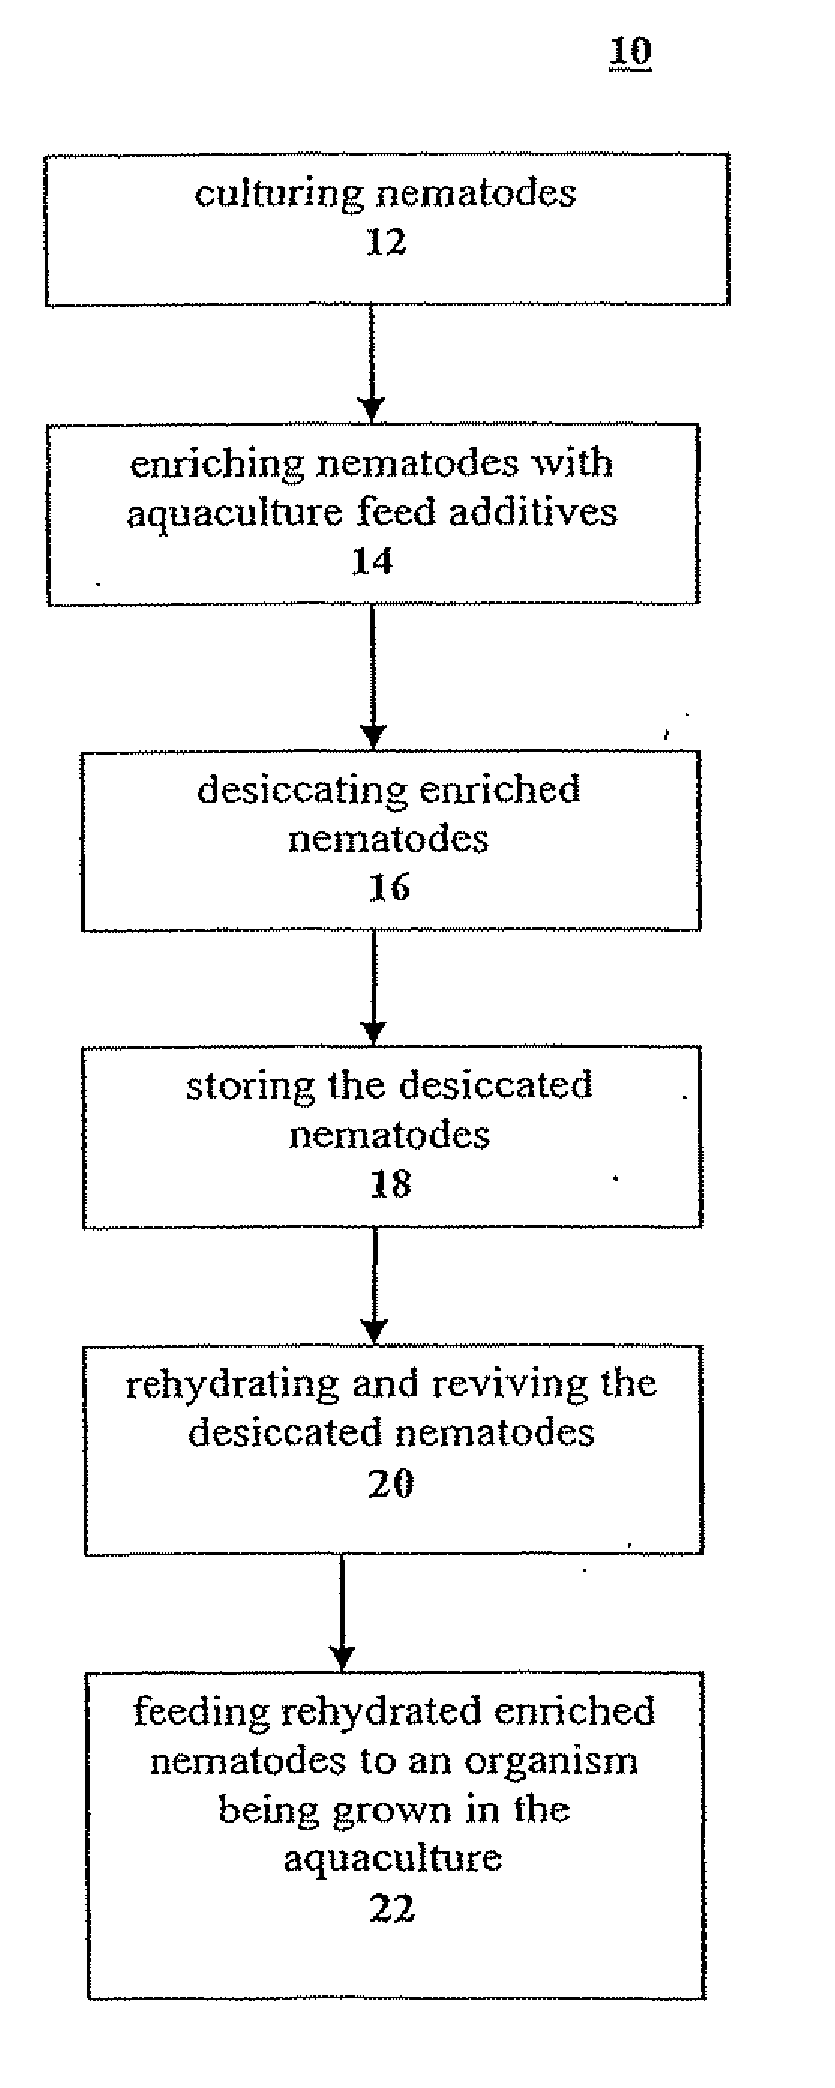 Process for storing enriched nematodes